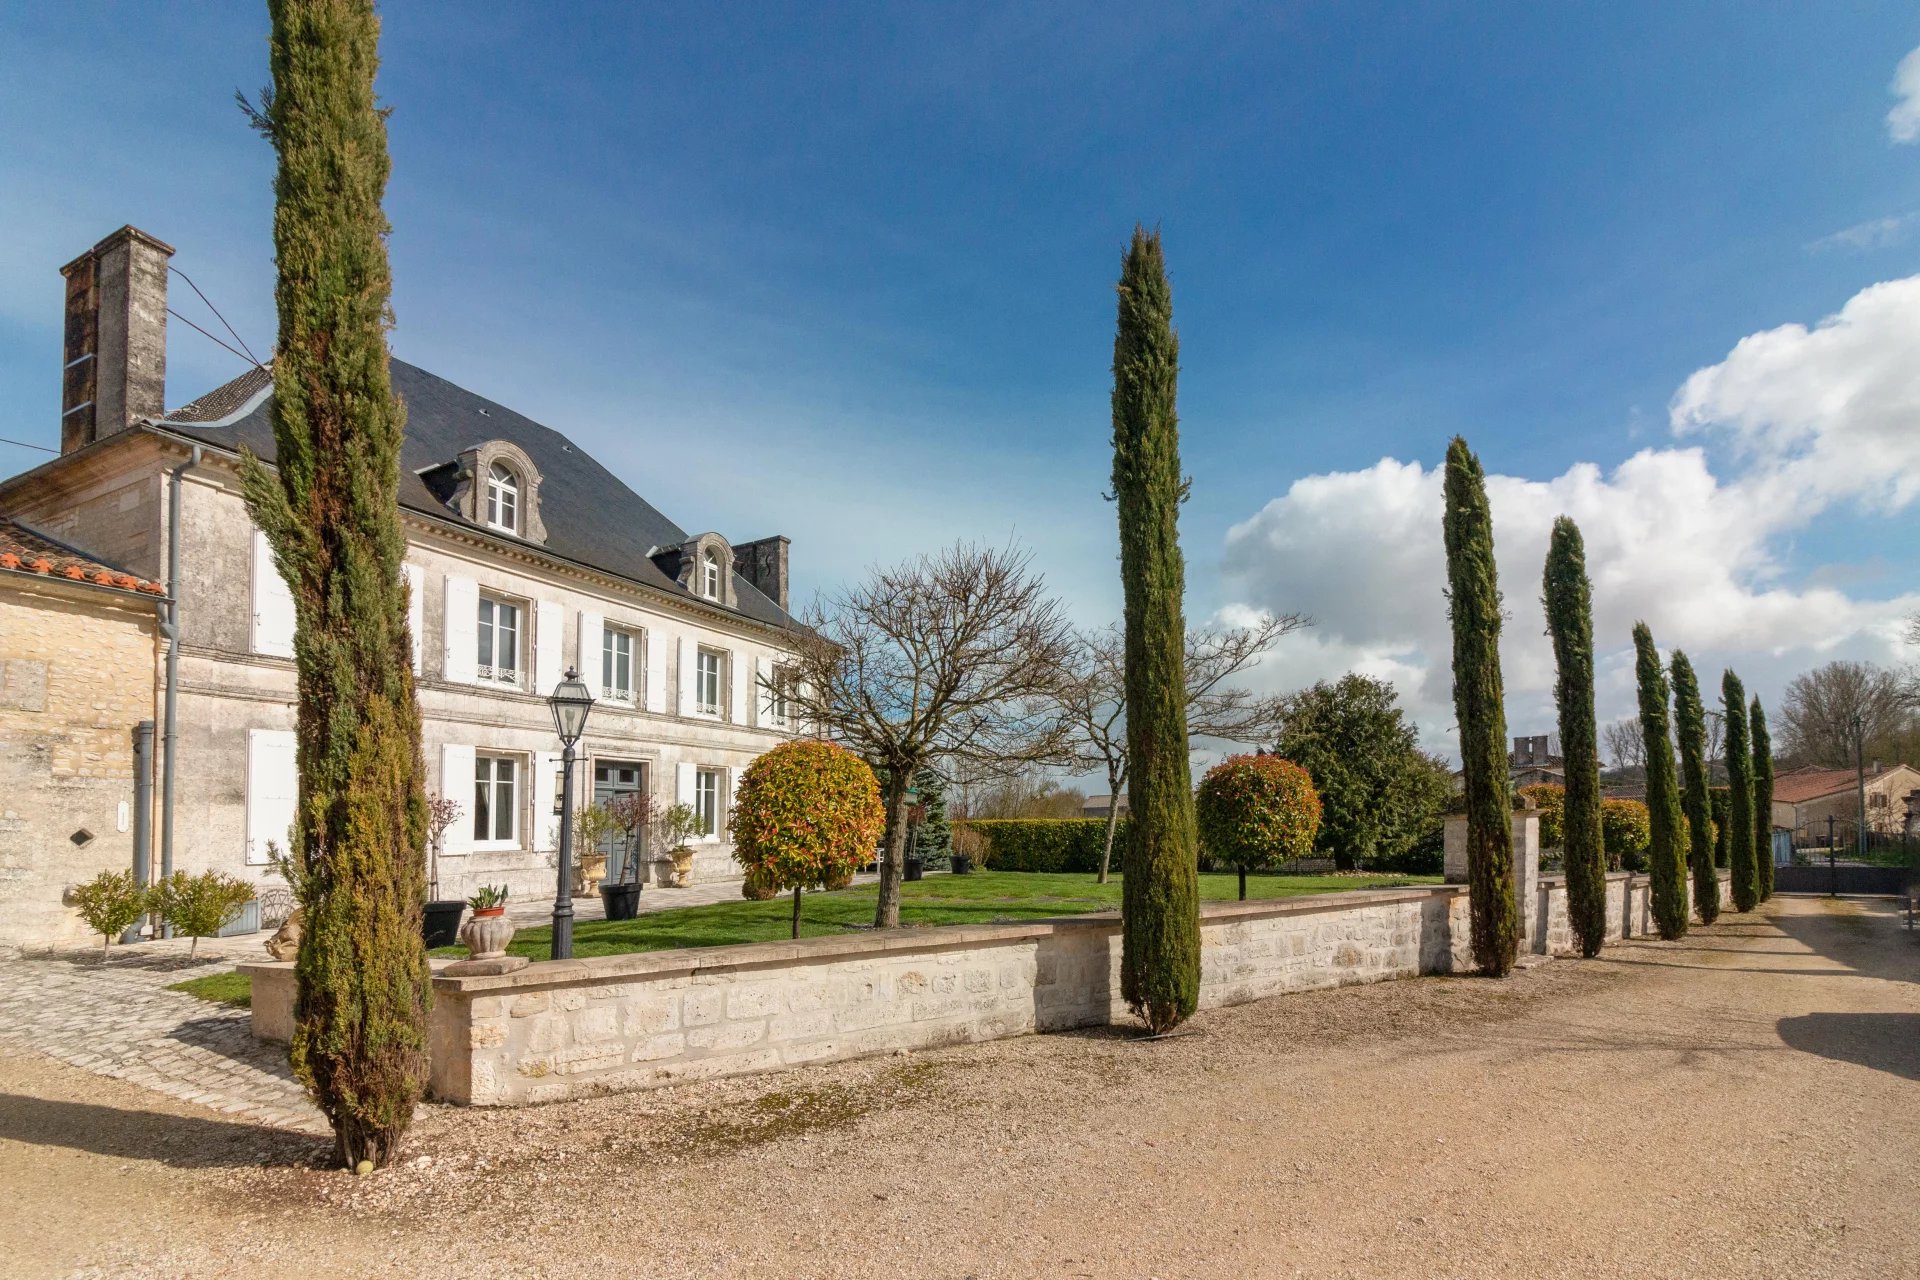 Beautifully presented Maison de Maître with pool